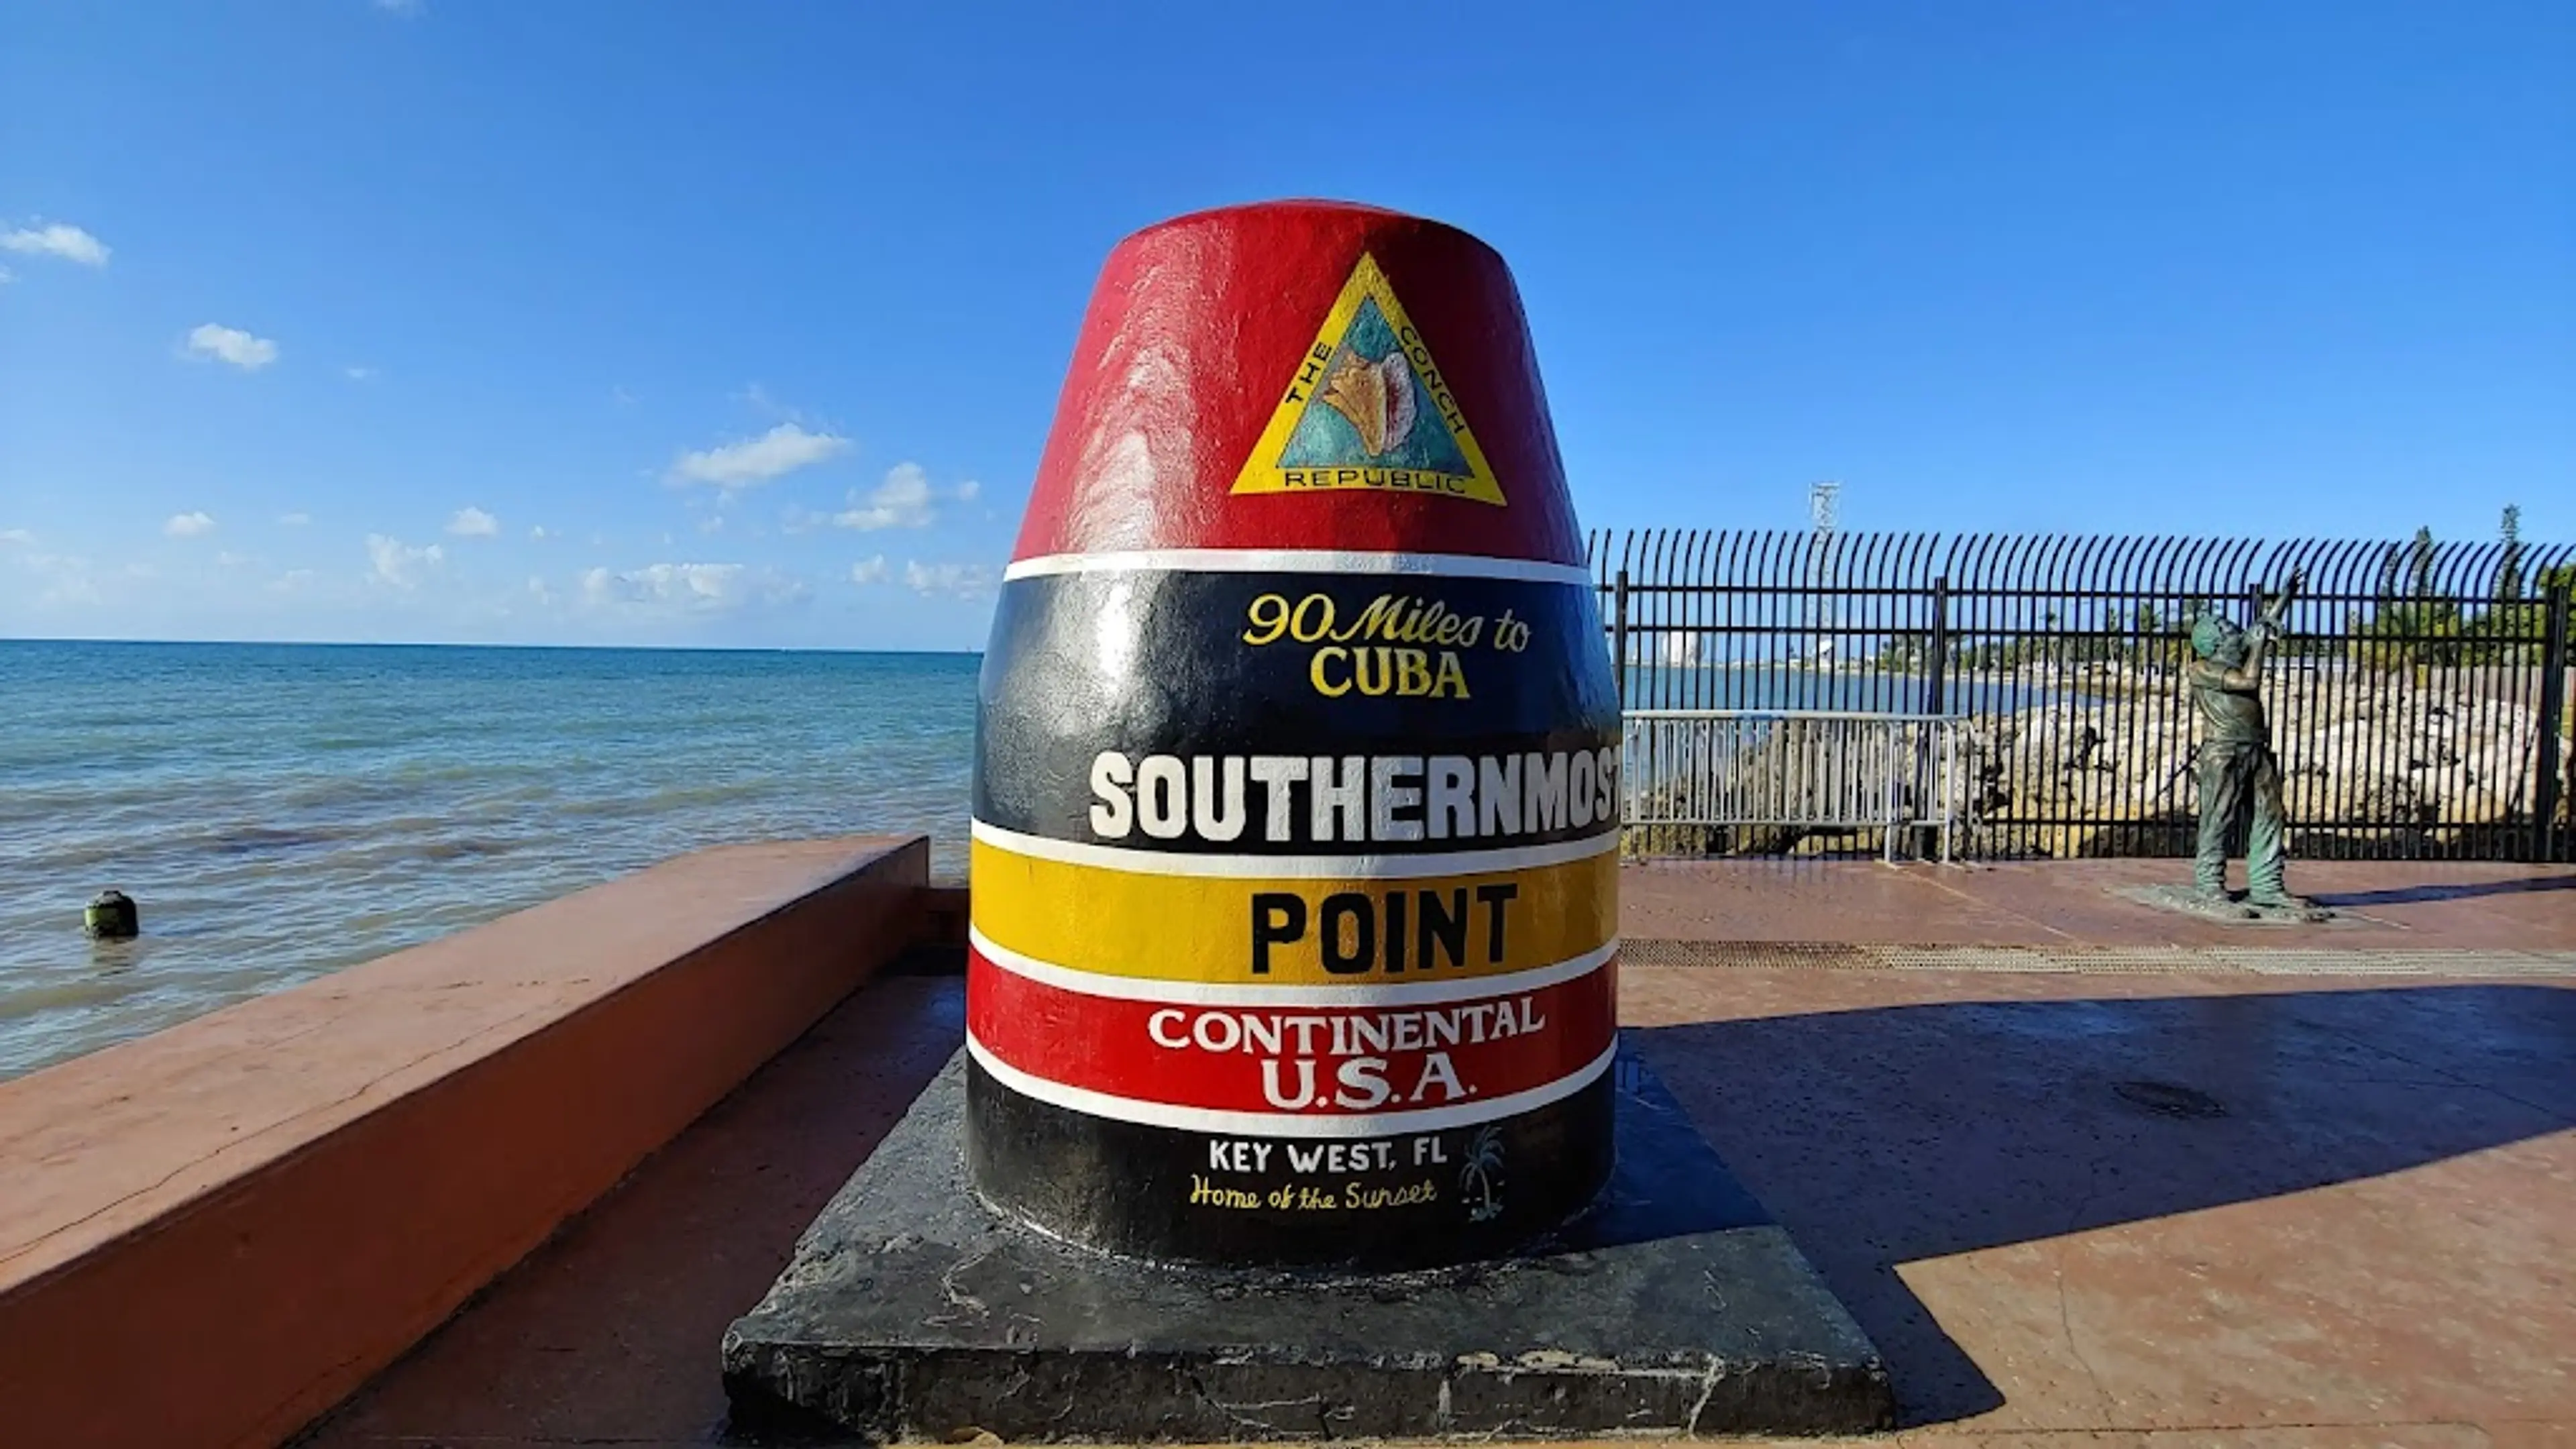 Southernmost Point of the Continental U.S.